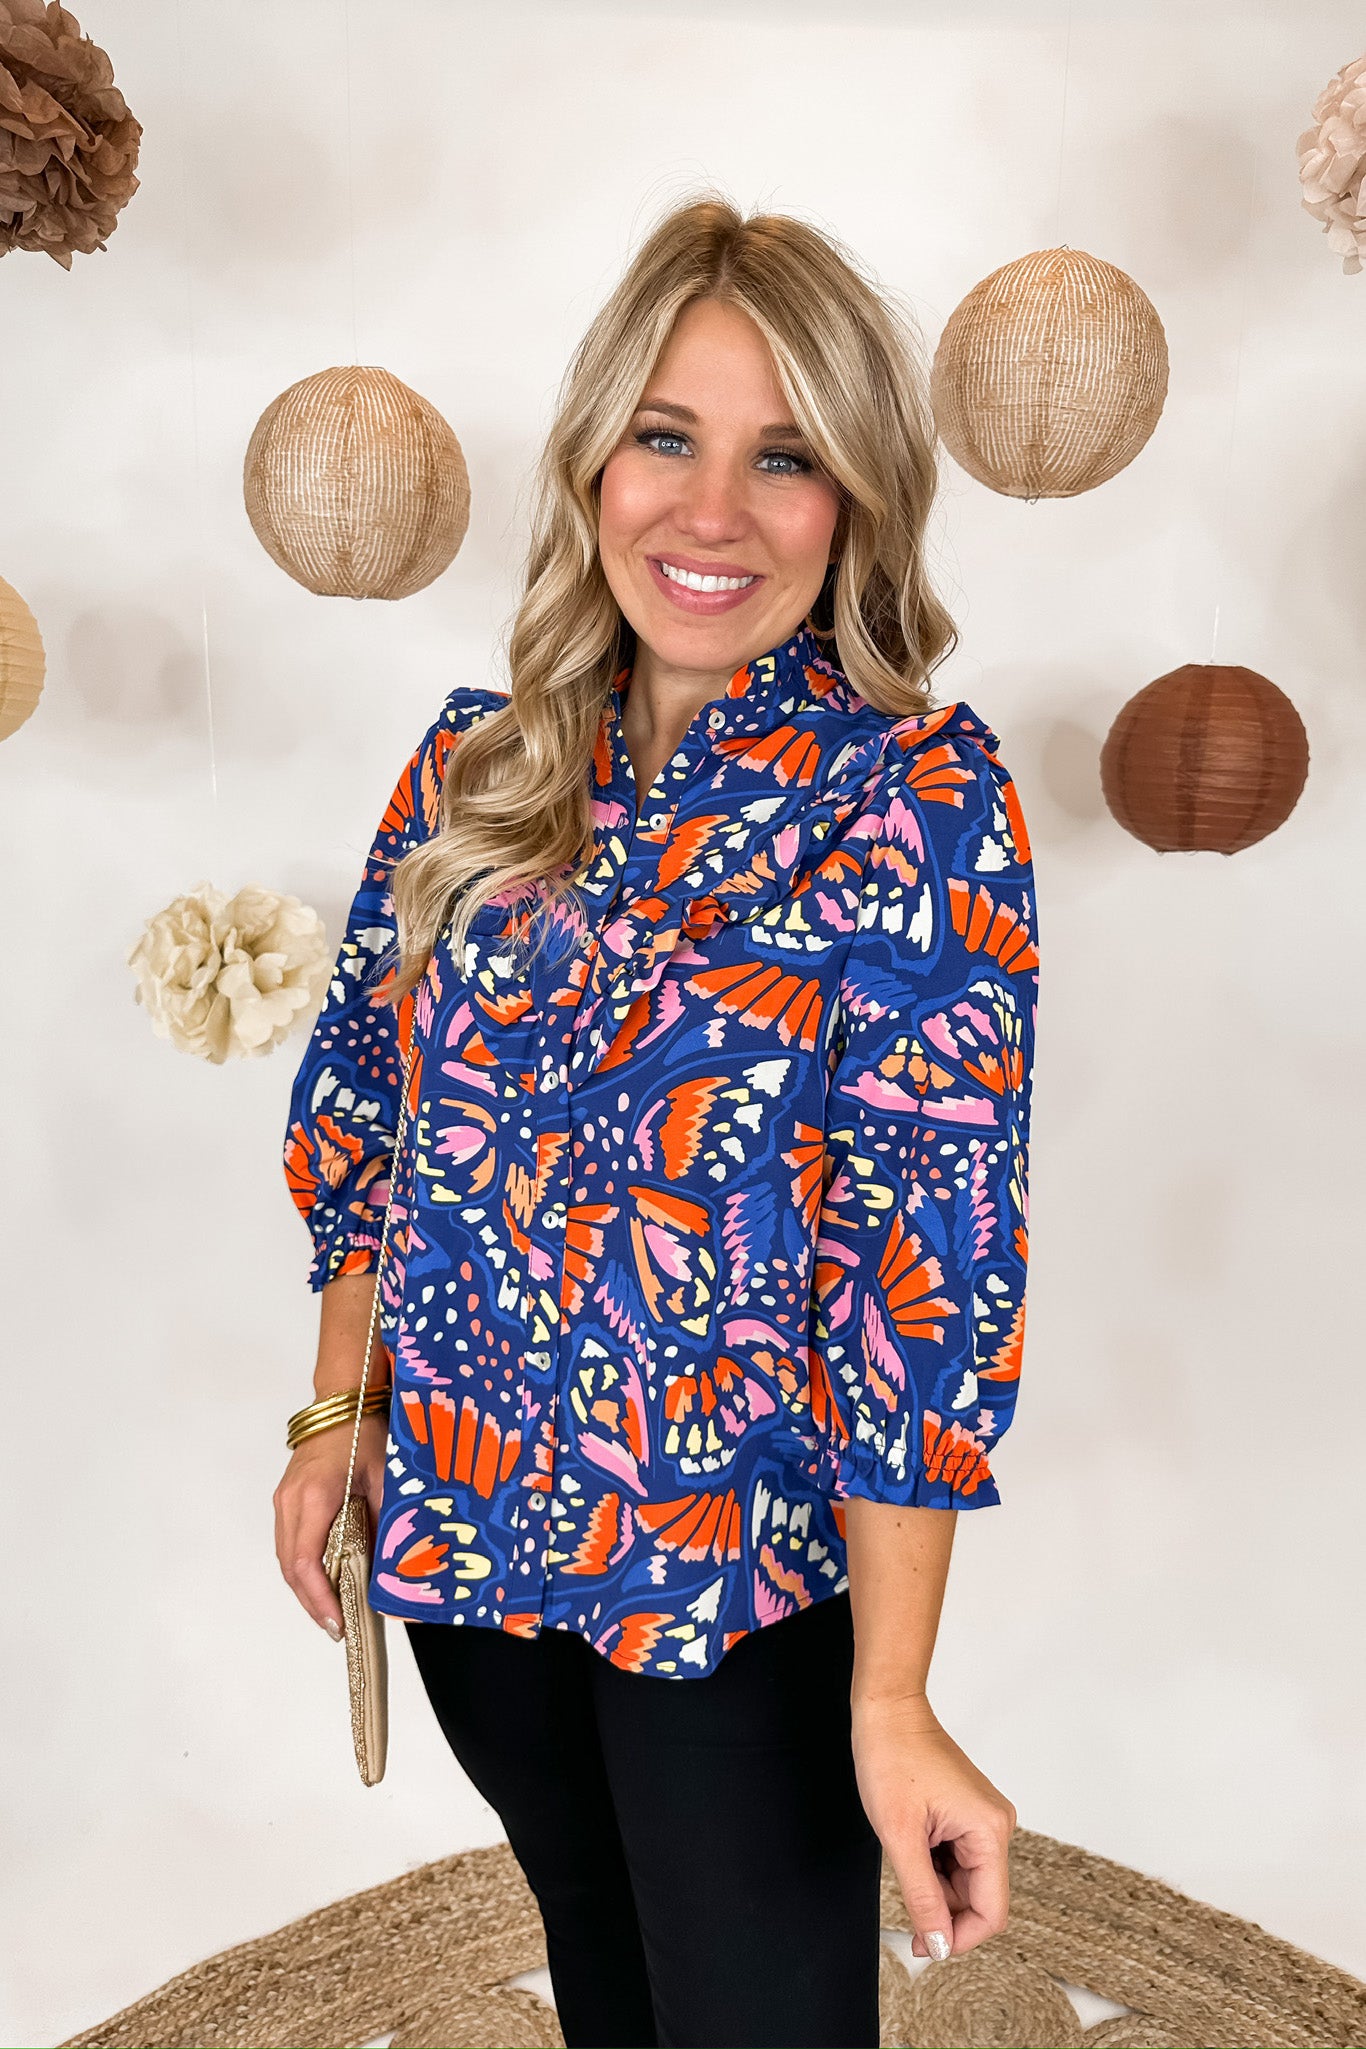 The Kelly So Fly Ruffle Top by Michelle McDowell